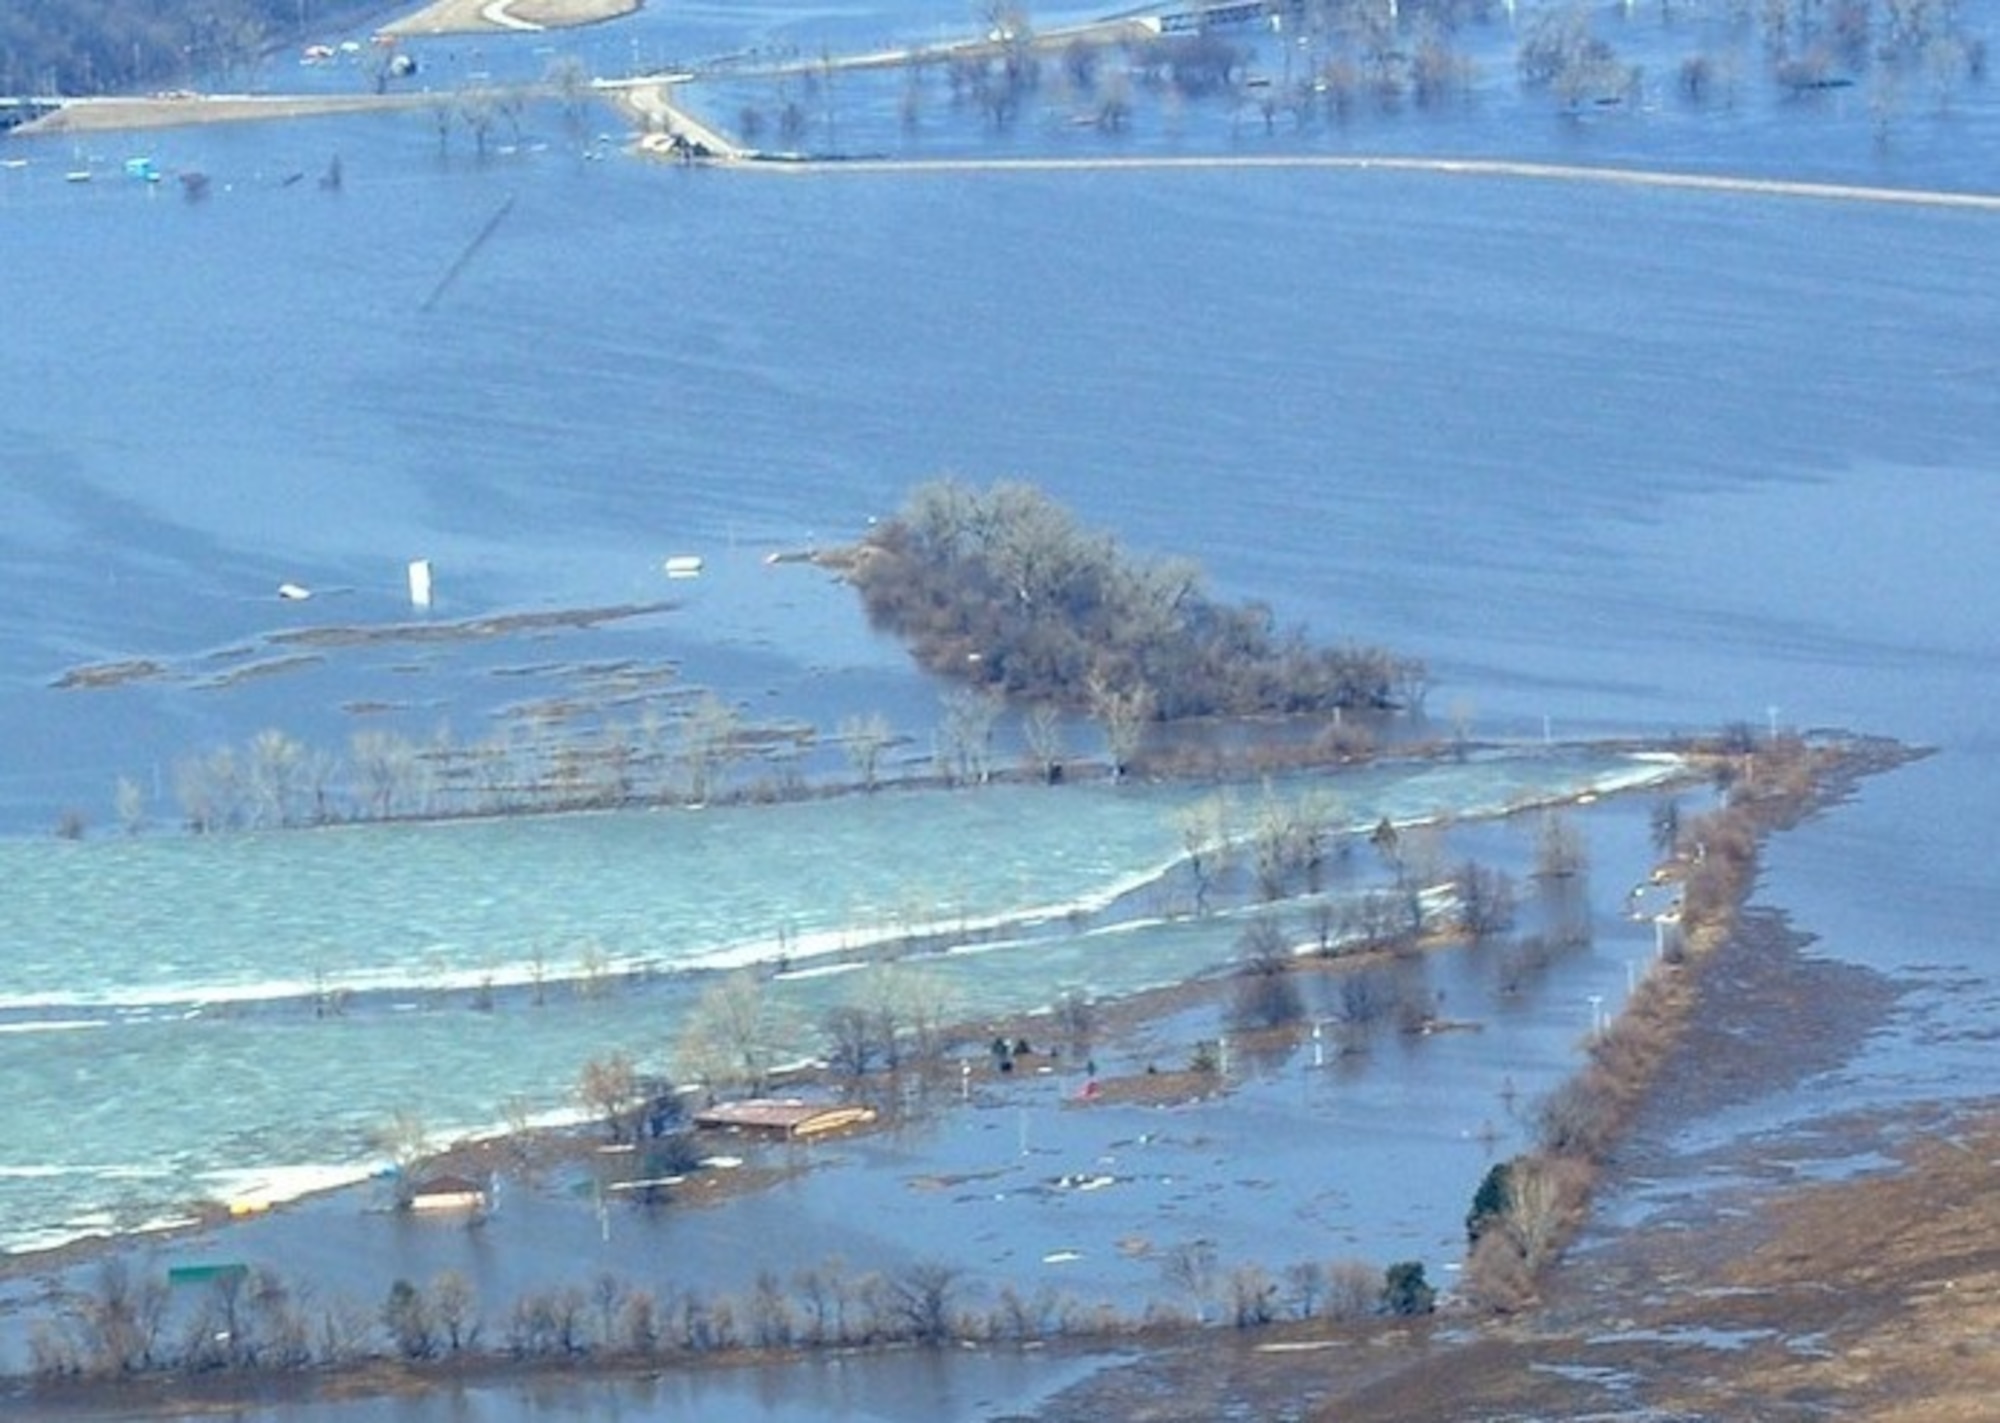 In March 2019, flood waters covered more than 30% of Offutt Air Force Base, Neb. This aerial picture shows the installation’s base lake recreation area facilities after flood waters started to recede. The U.S. Army Corps of Engineers, Omaha District, recently awarded more than $16 million for the first two military construction contracts as a result of the damage.